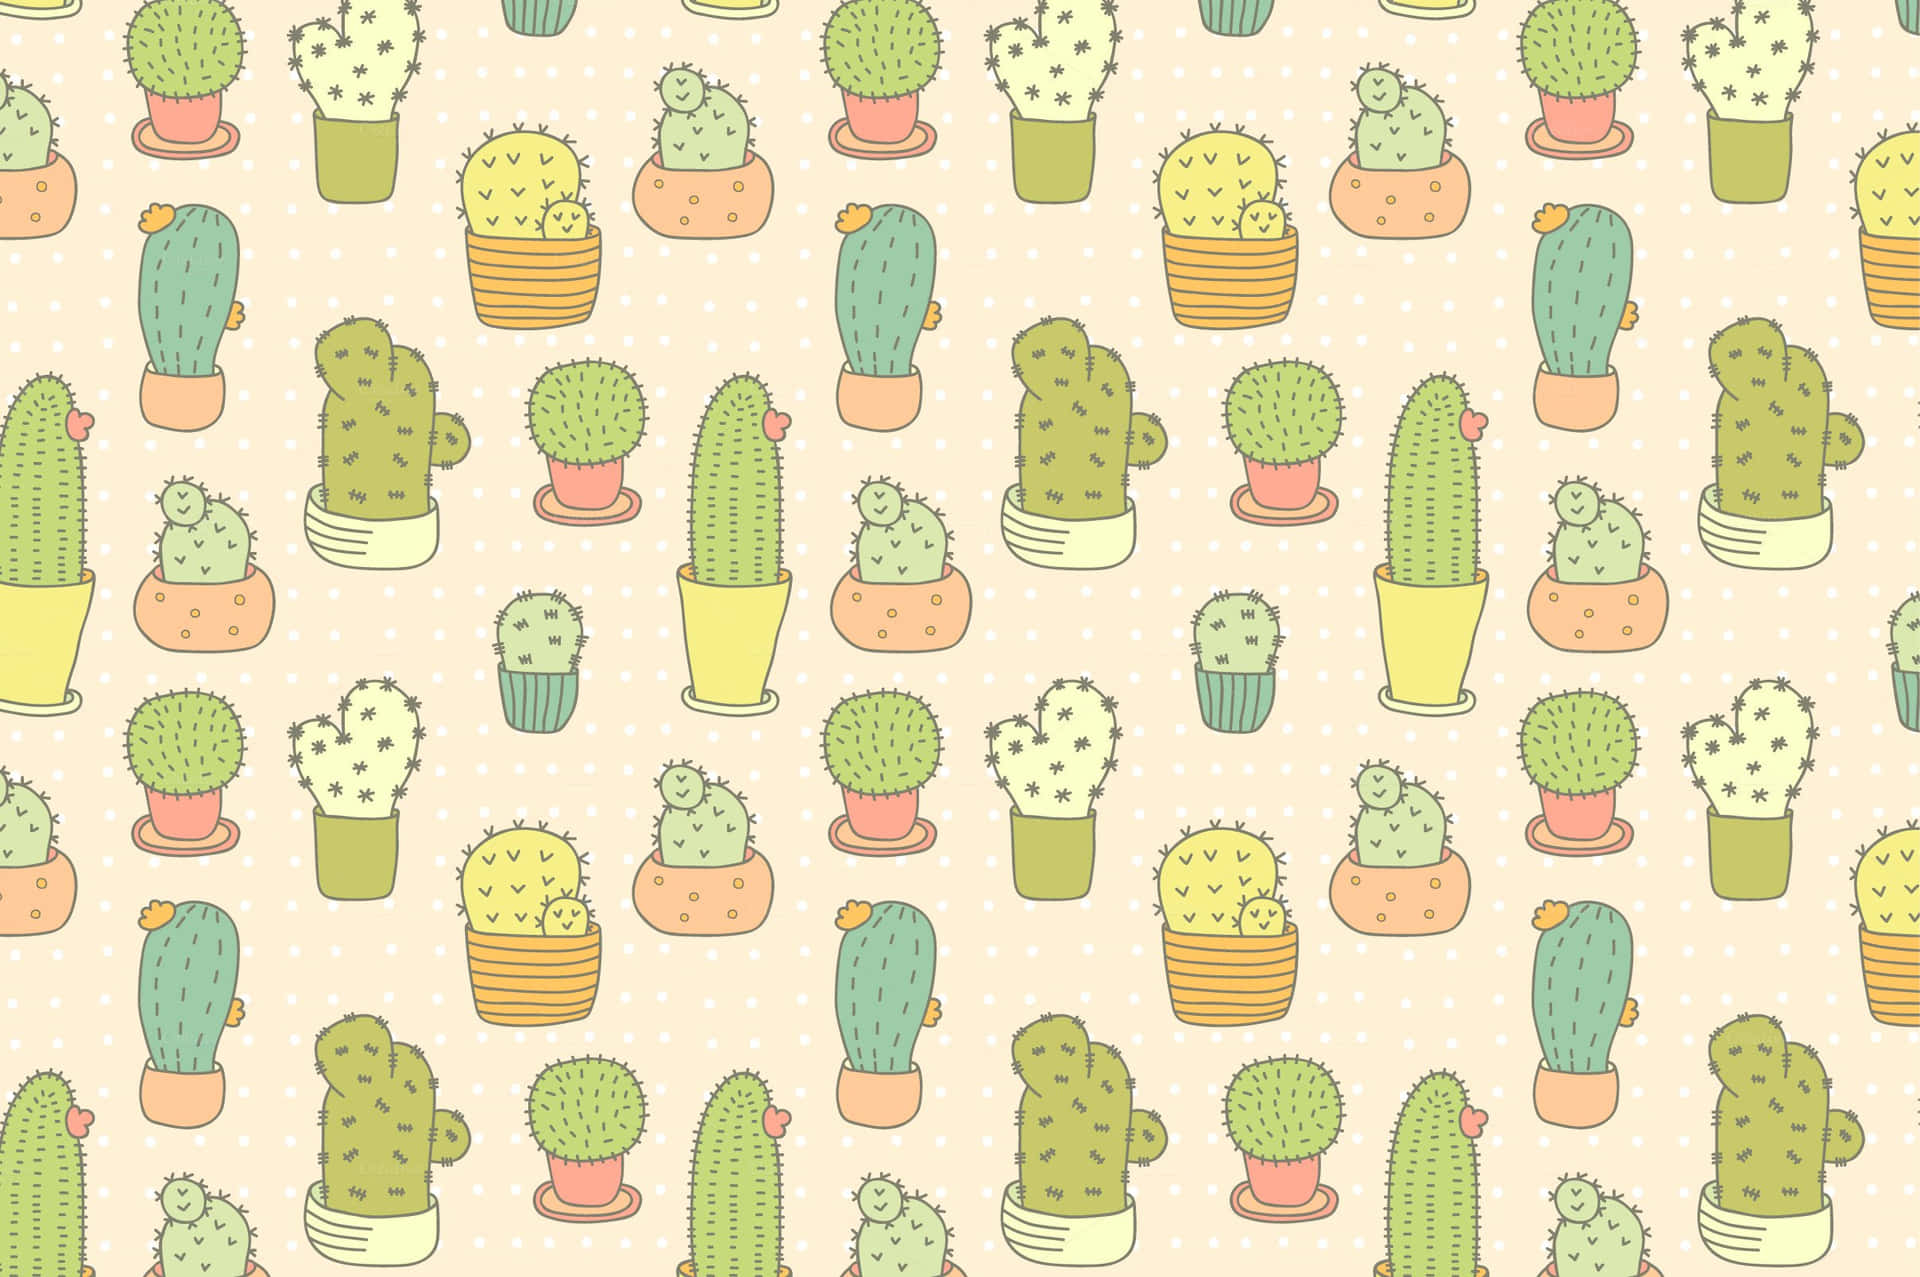 A Cute And Lovely Little Cactus In Its Natural Environment, Perfect For Brightening Up Any Room. Background